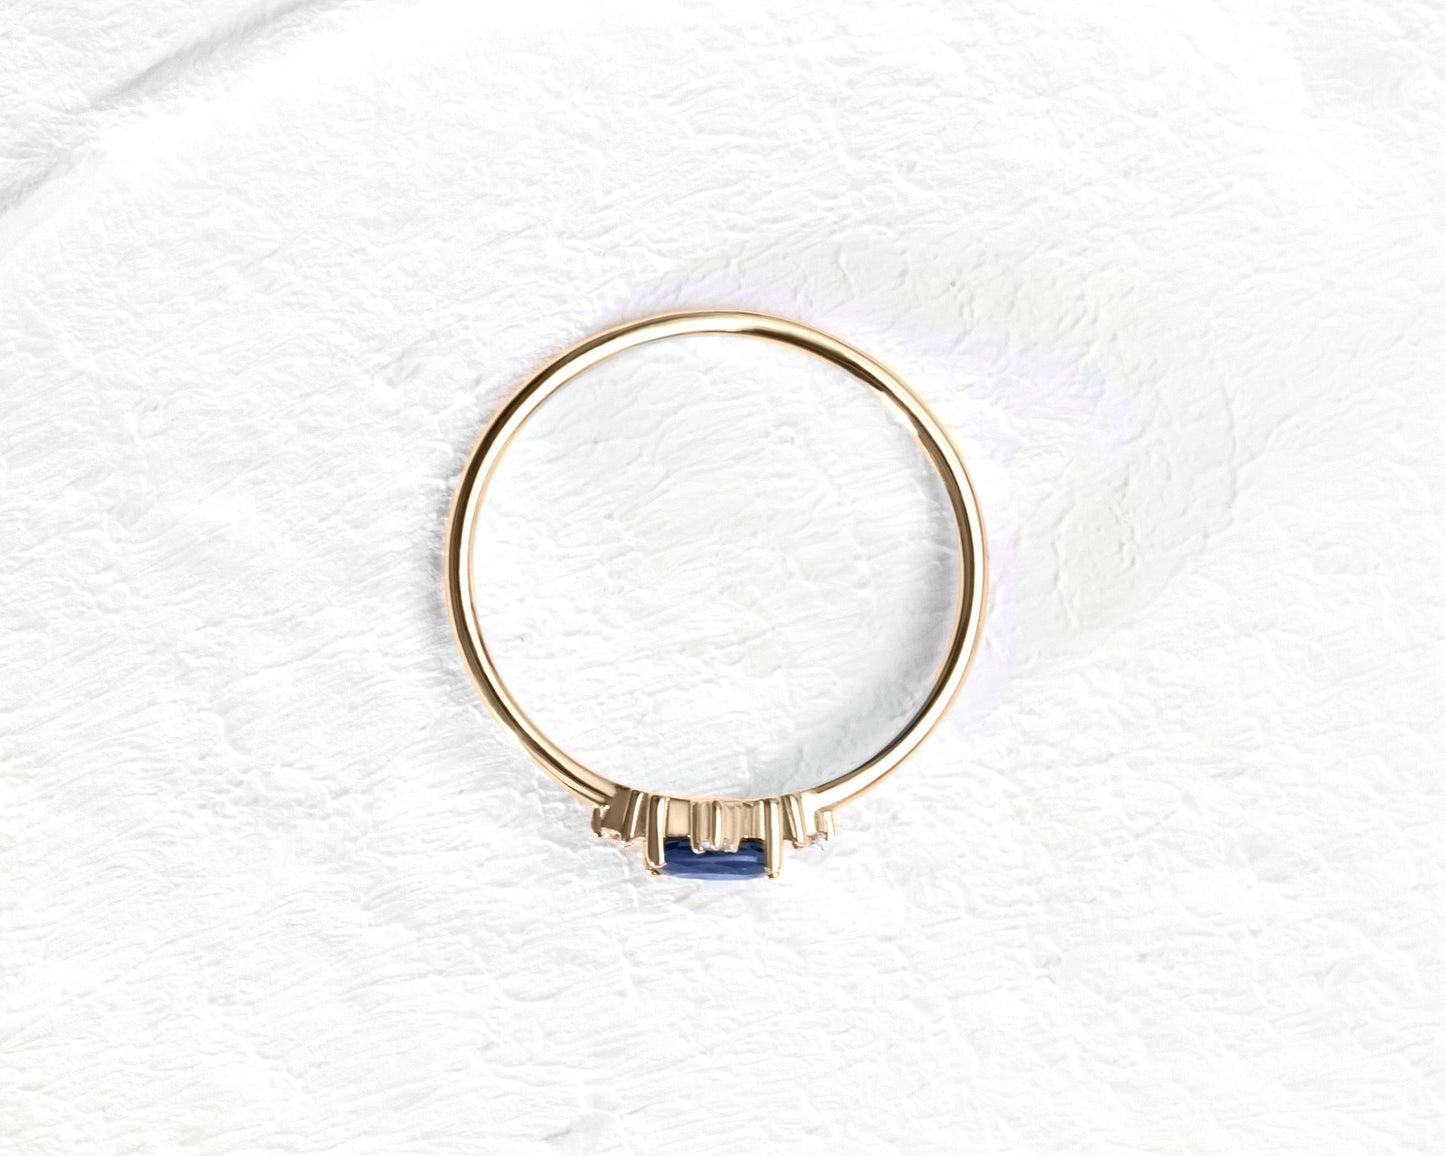 Dainty Ring, Oval Flower Ring, Oval cut Sapphire with 4 Diamonds, 14K Gold